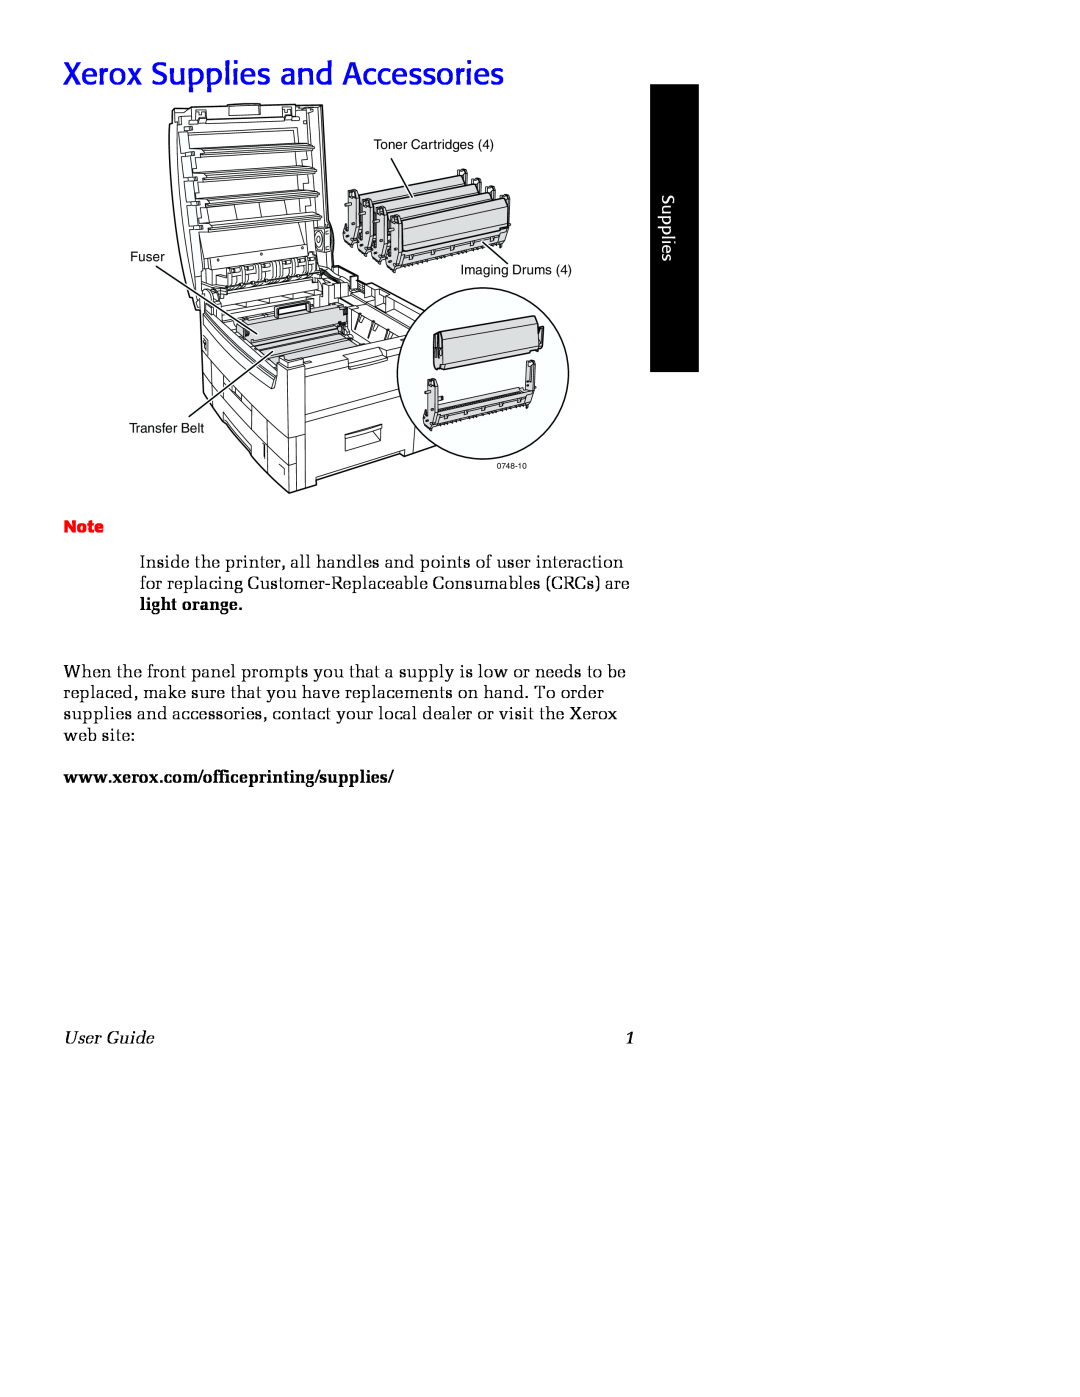 Xerox Phaser 2135 manual Xerox Supplies and Accessories, User Guide 